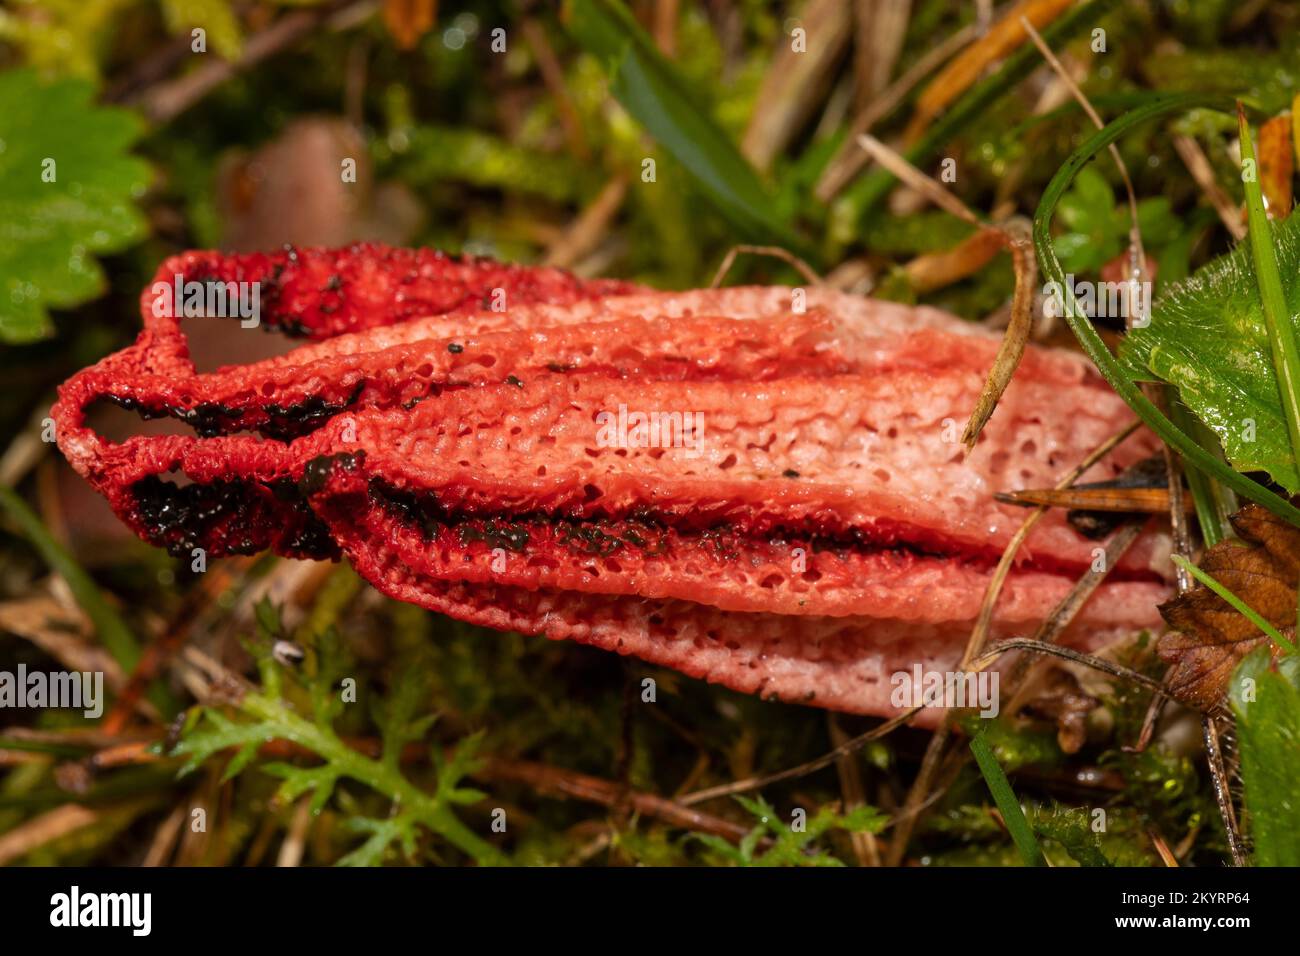 Octopus Stinkhorn fruiting body with red octopus-like arms in green meadow Stock Photo